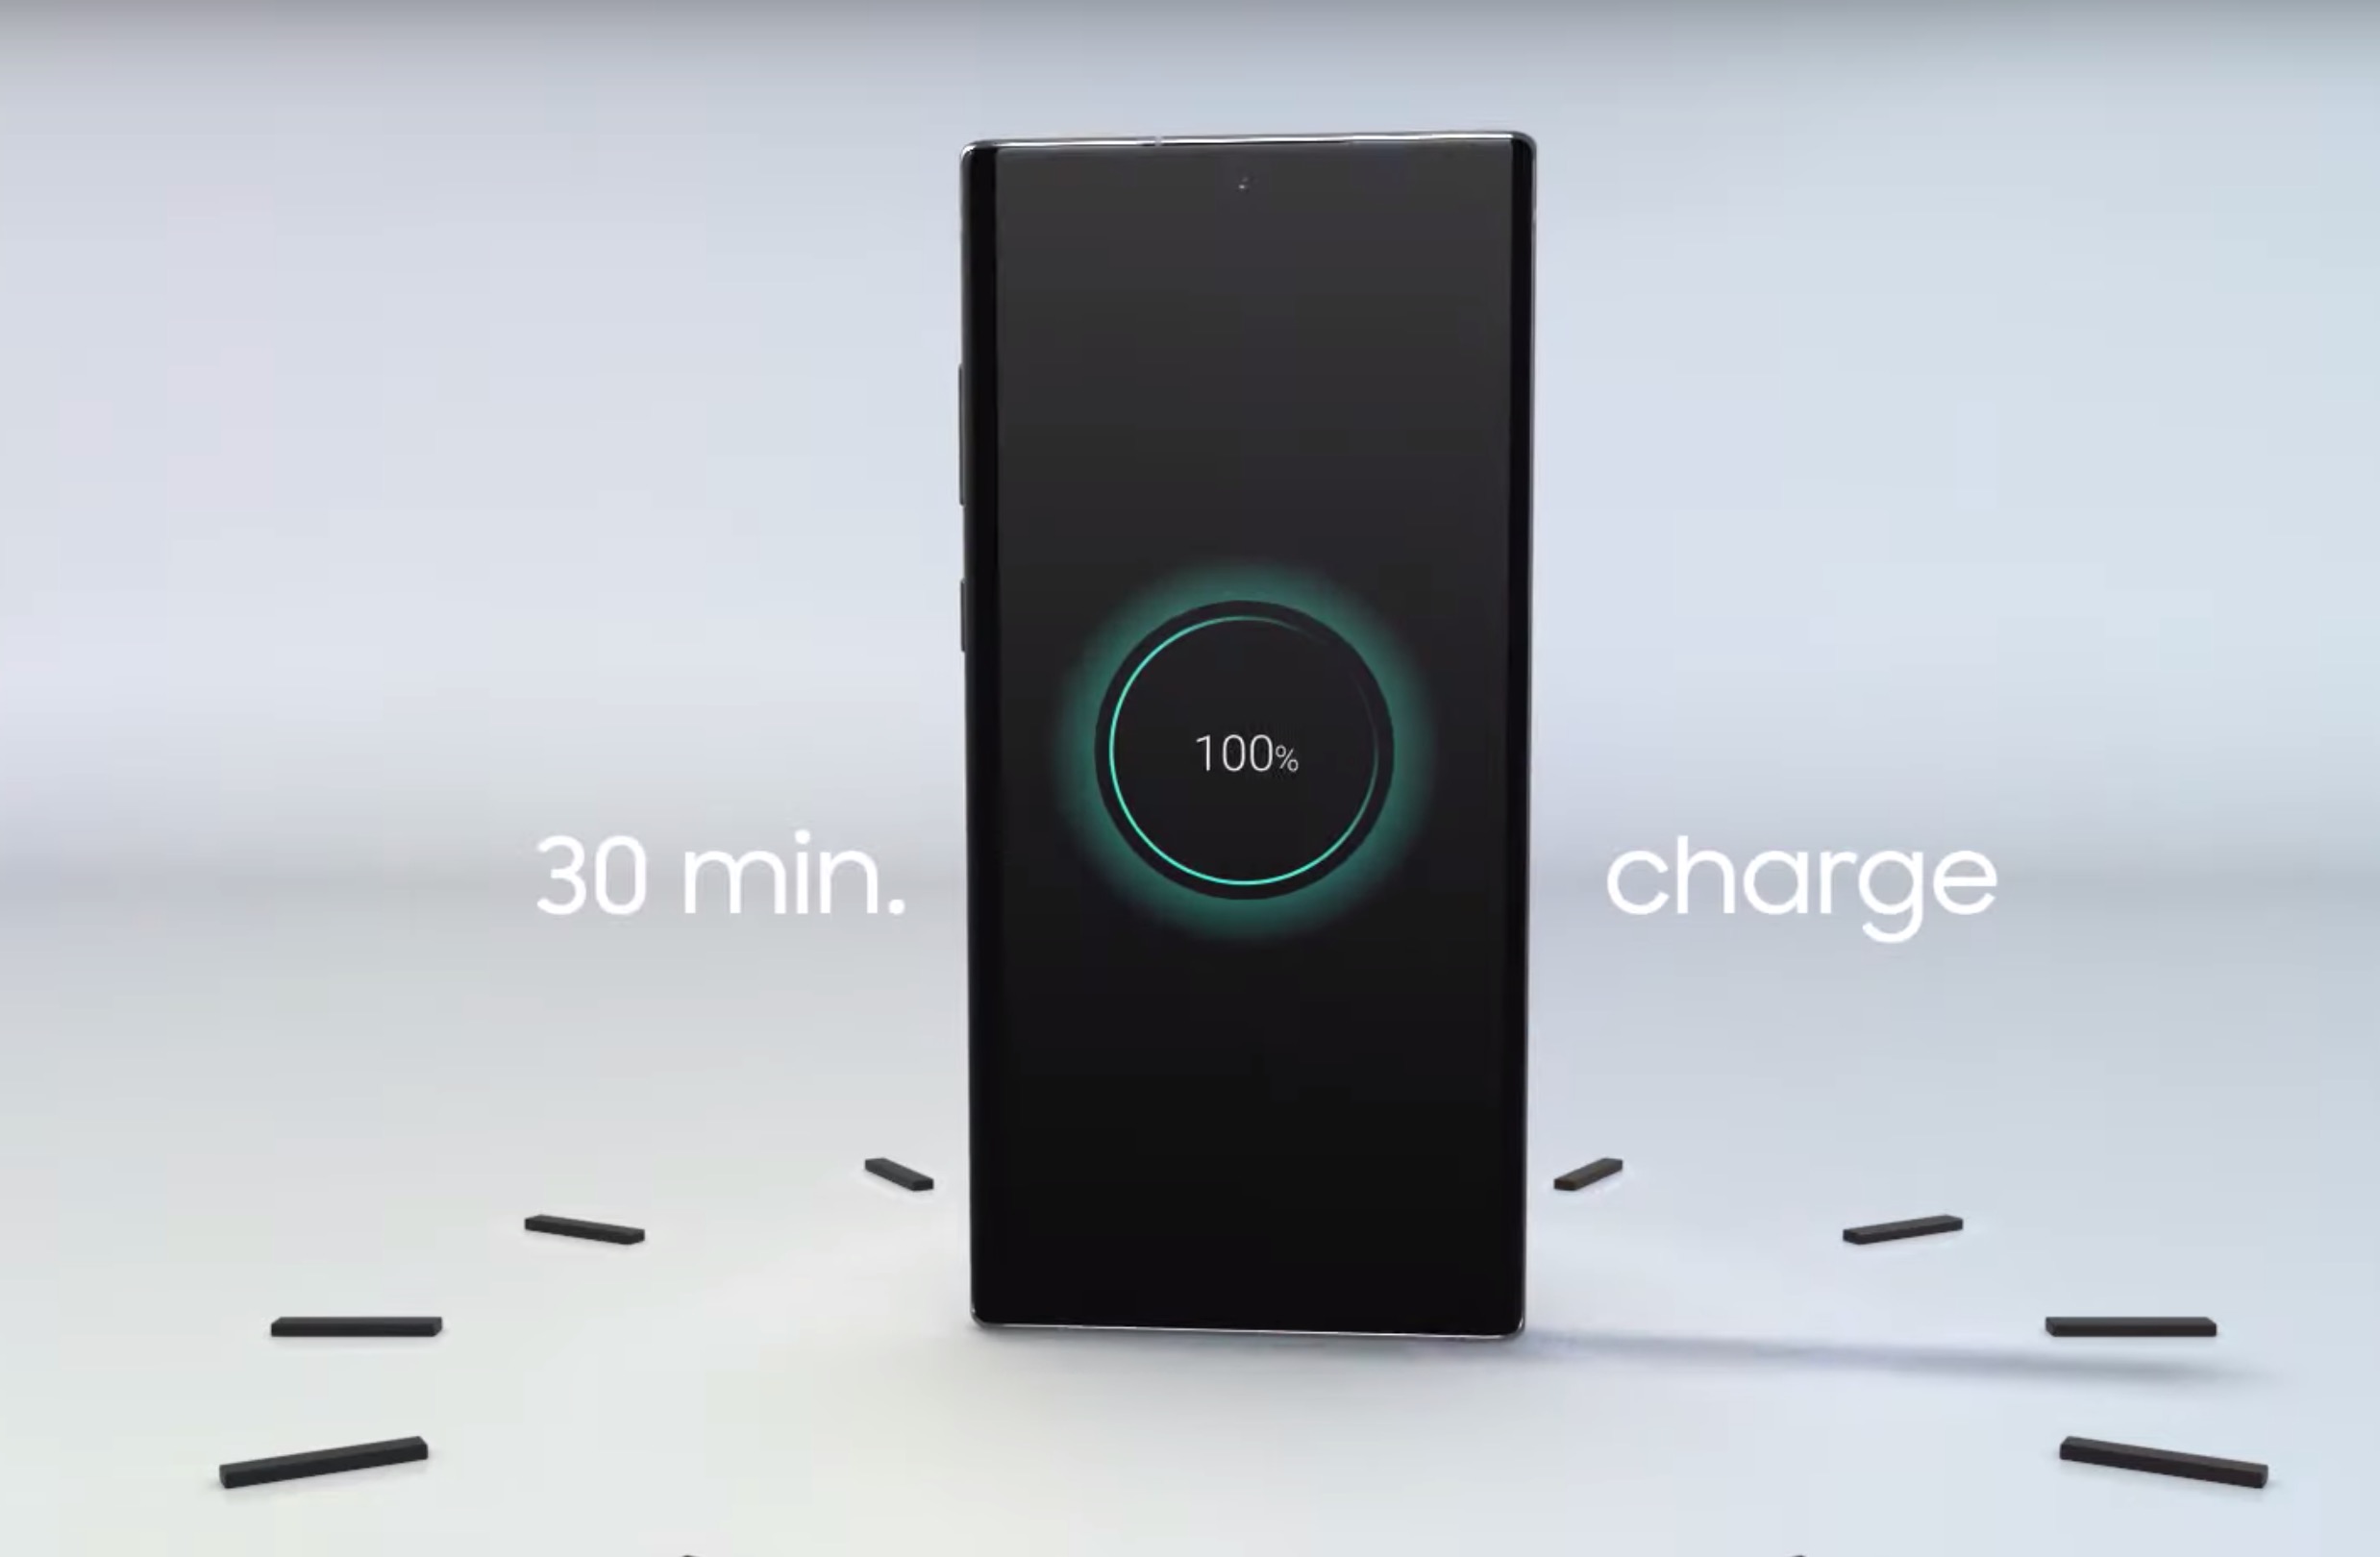 You can completely recharge the Galaxy Note 10 in just 30 minutes.